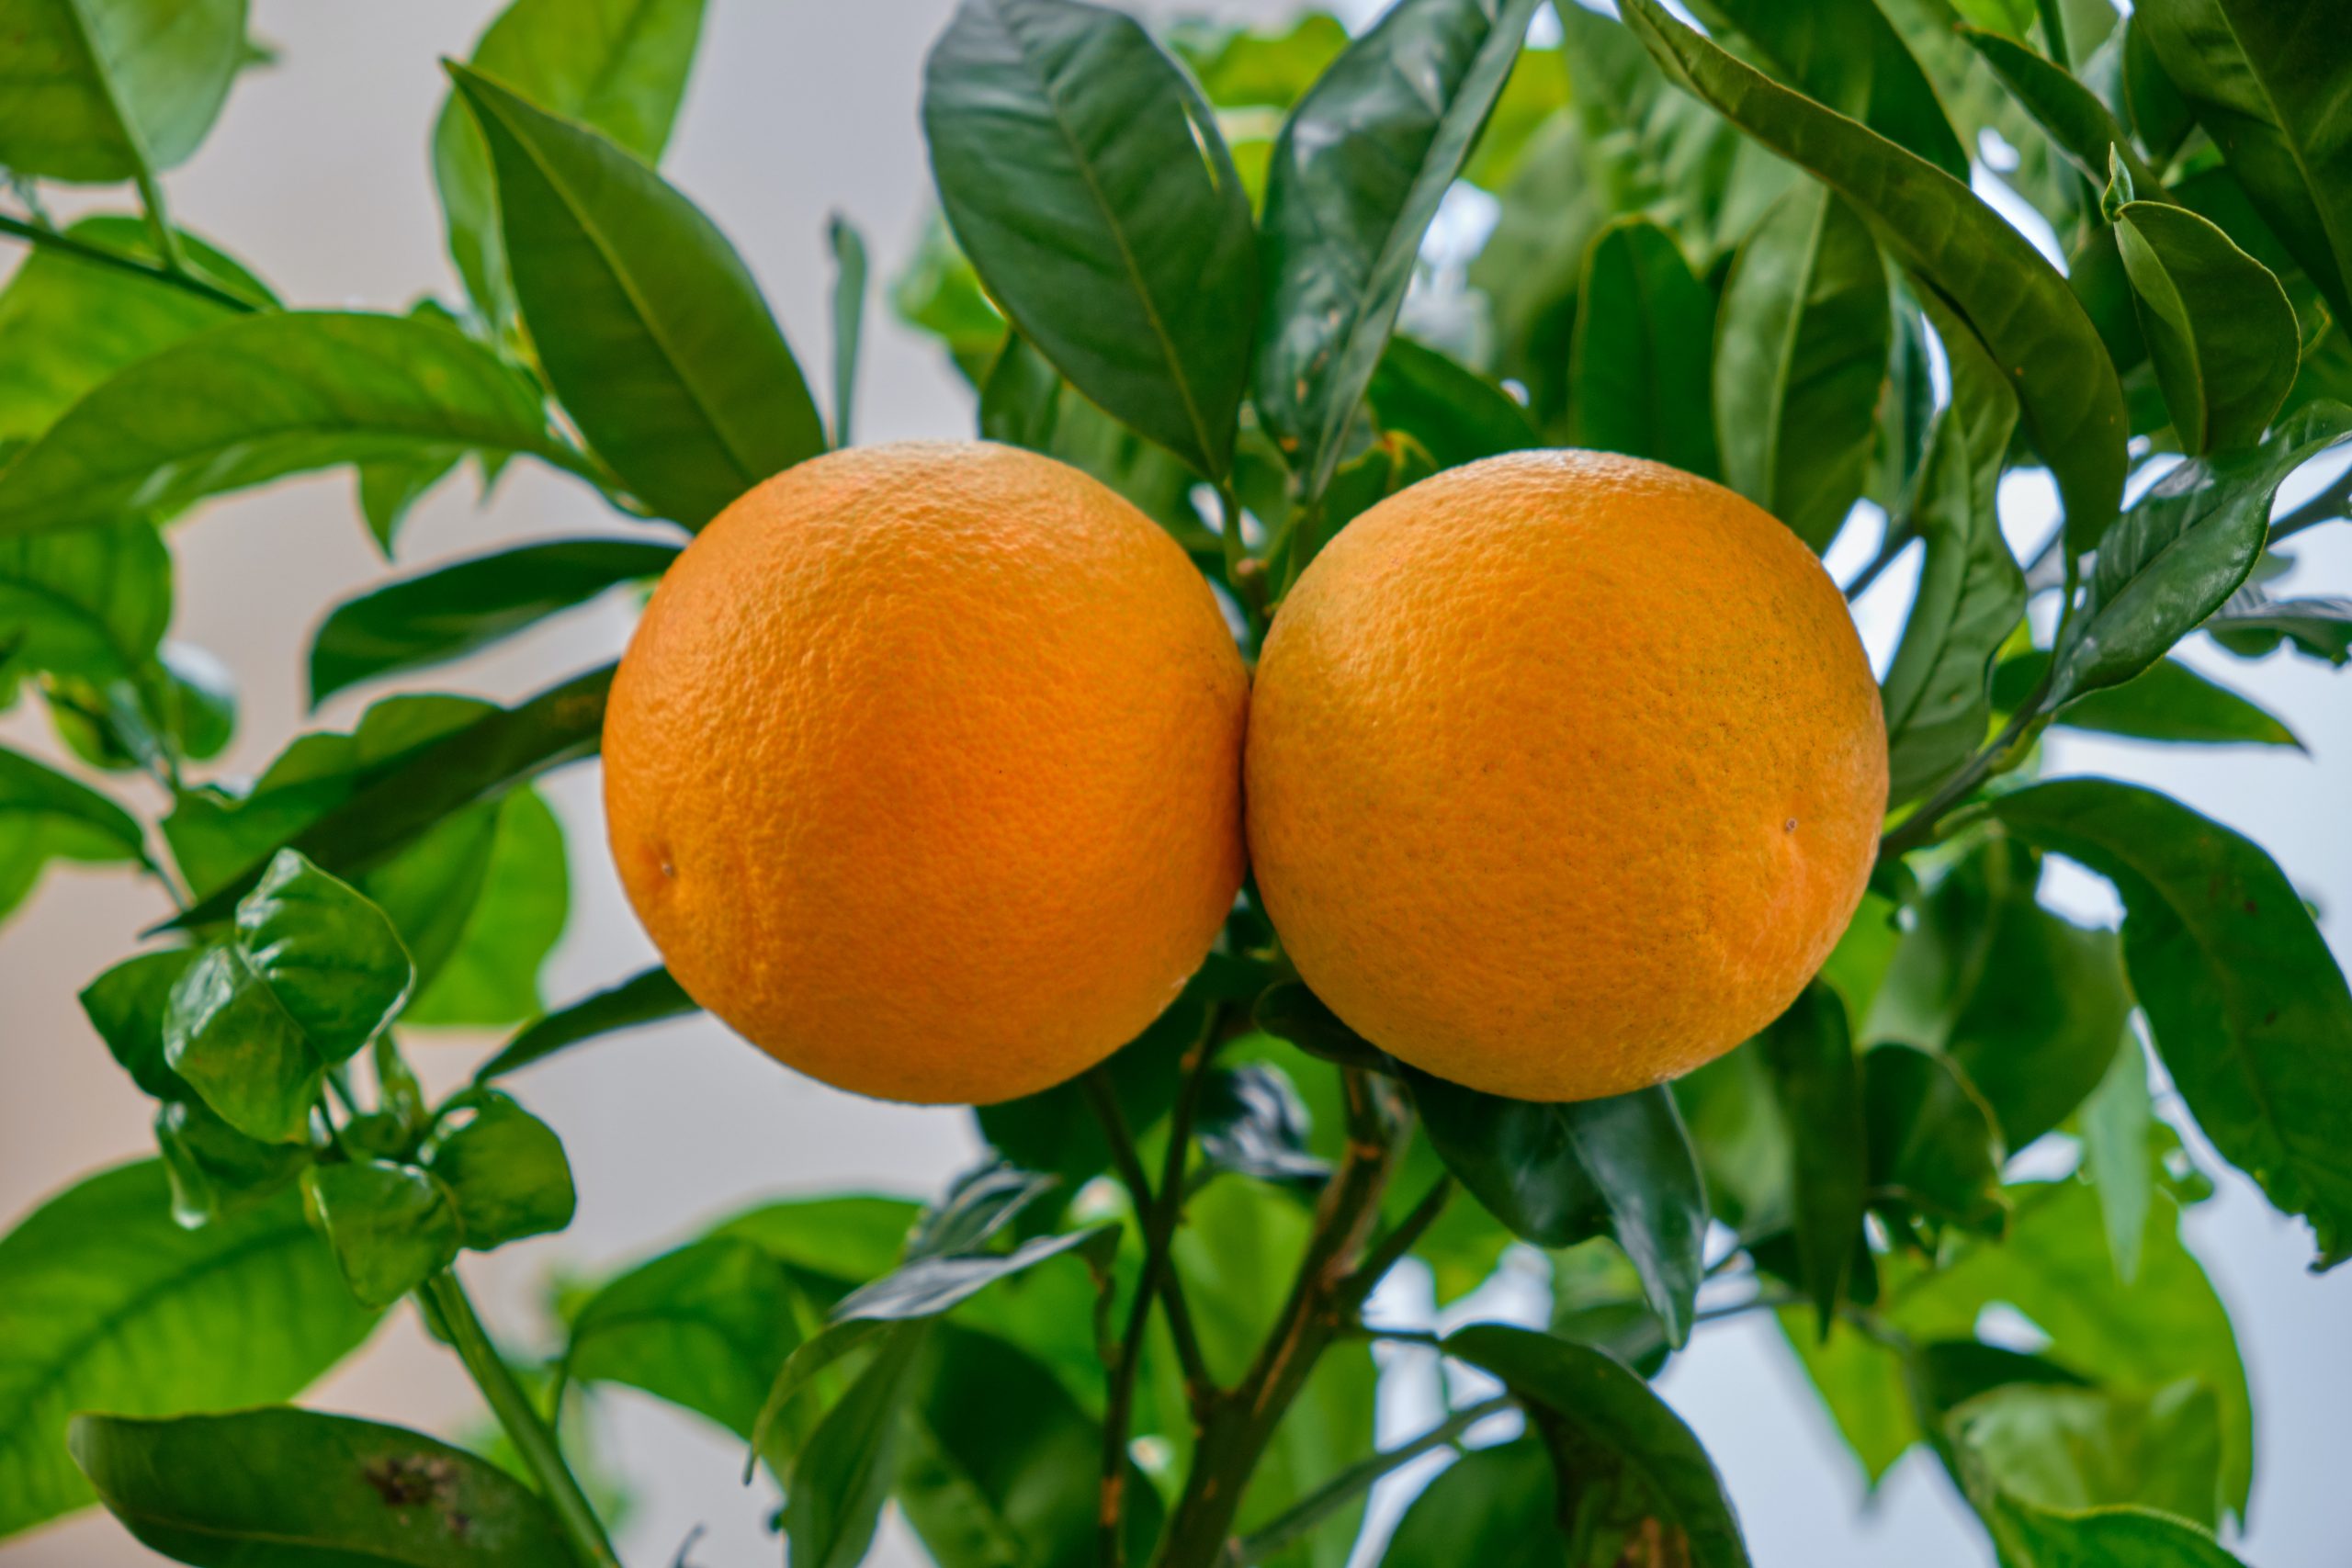 How Much Fruit Does A Dwarf Orange Tree Produce?